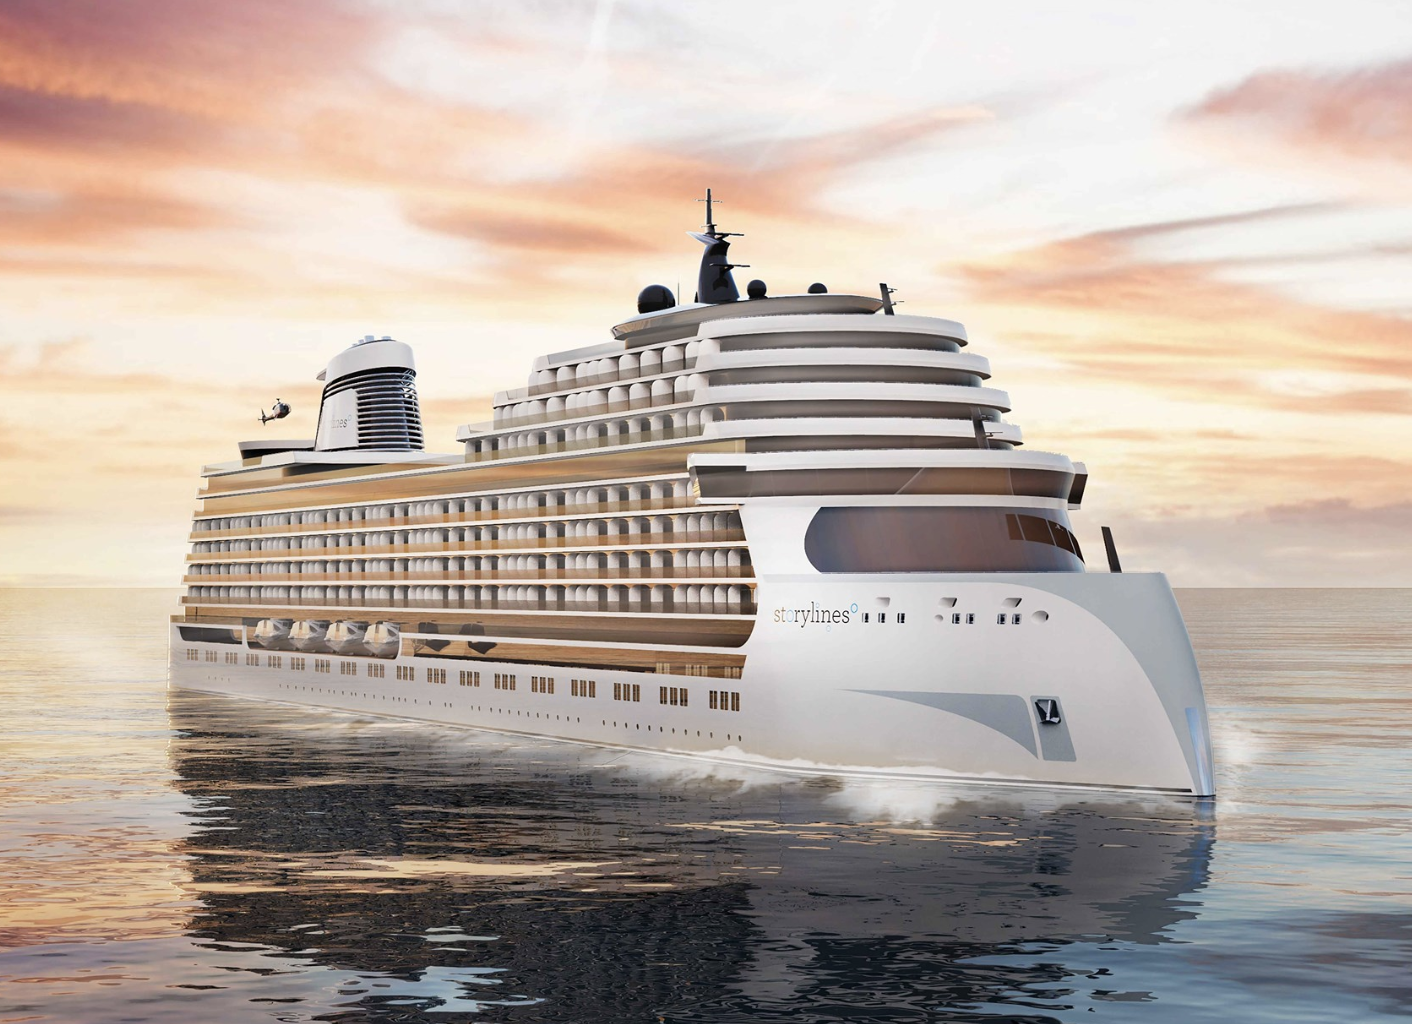 Can cruising the high seas in style be cheaper than a retirement village? We find out